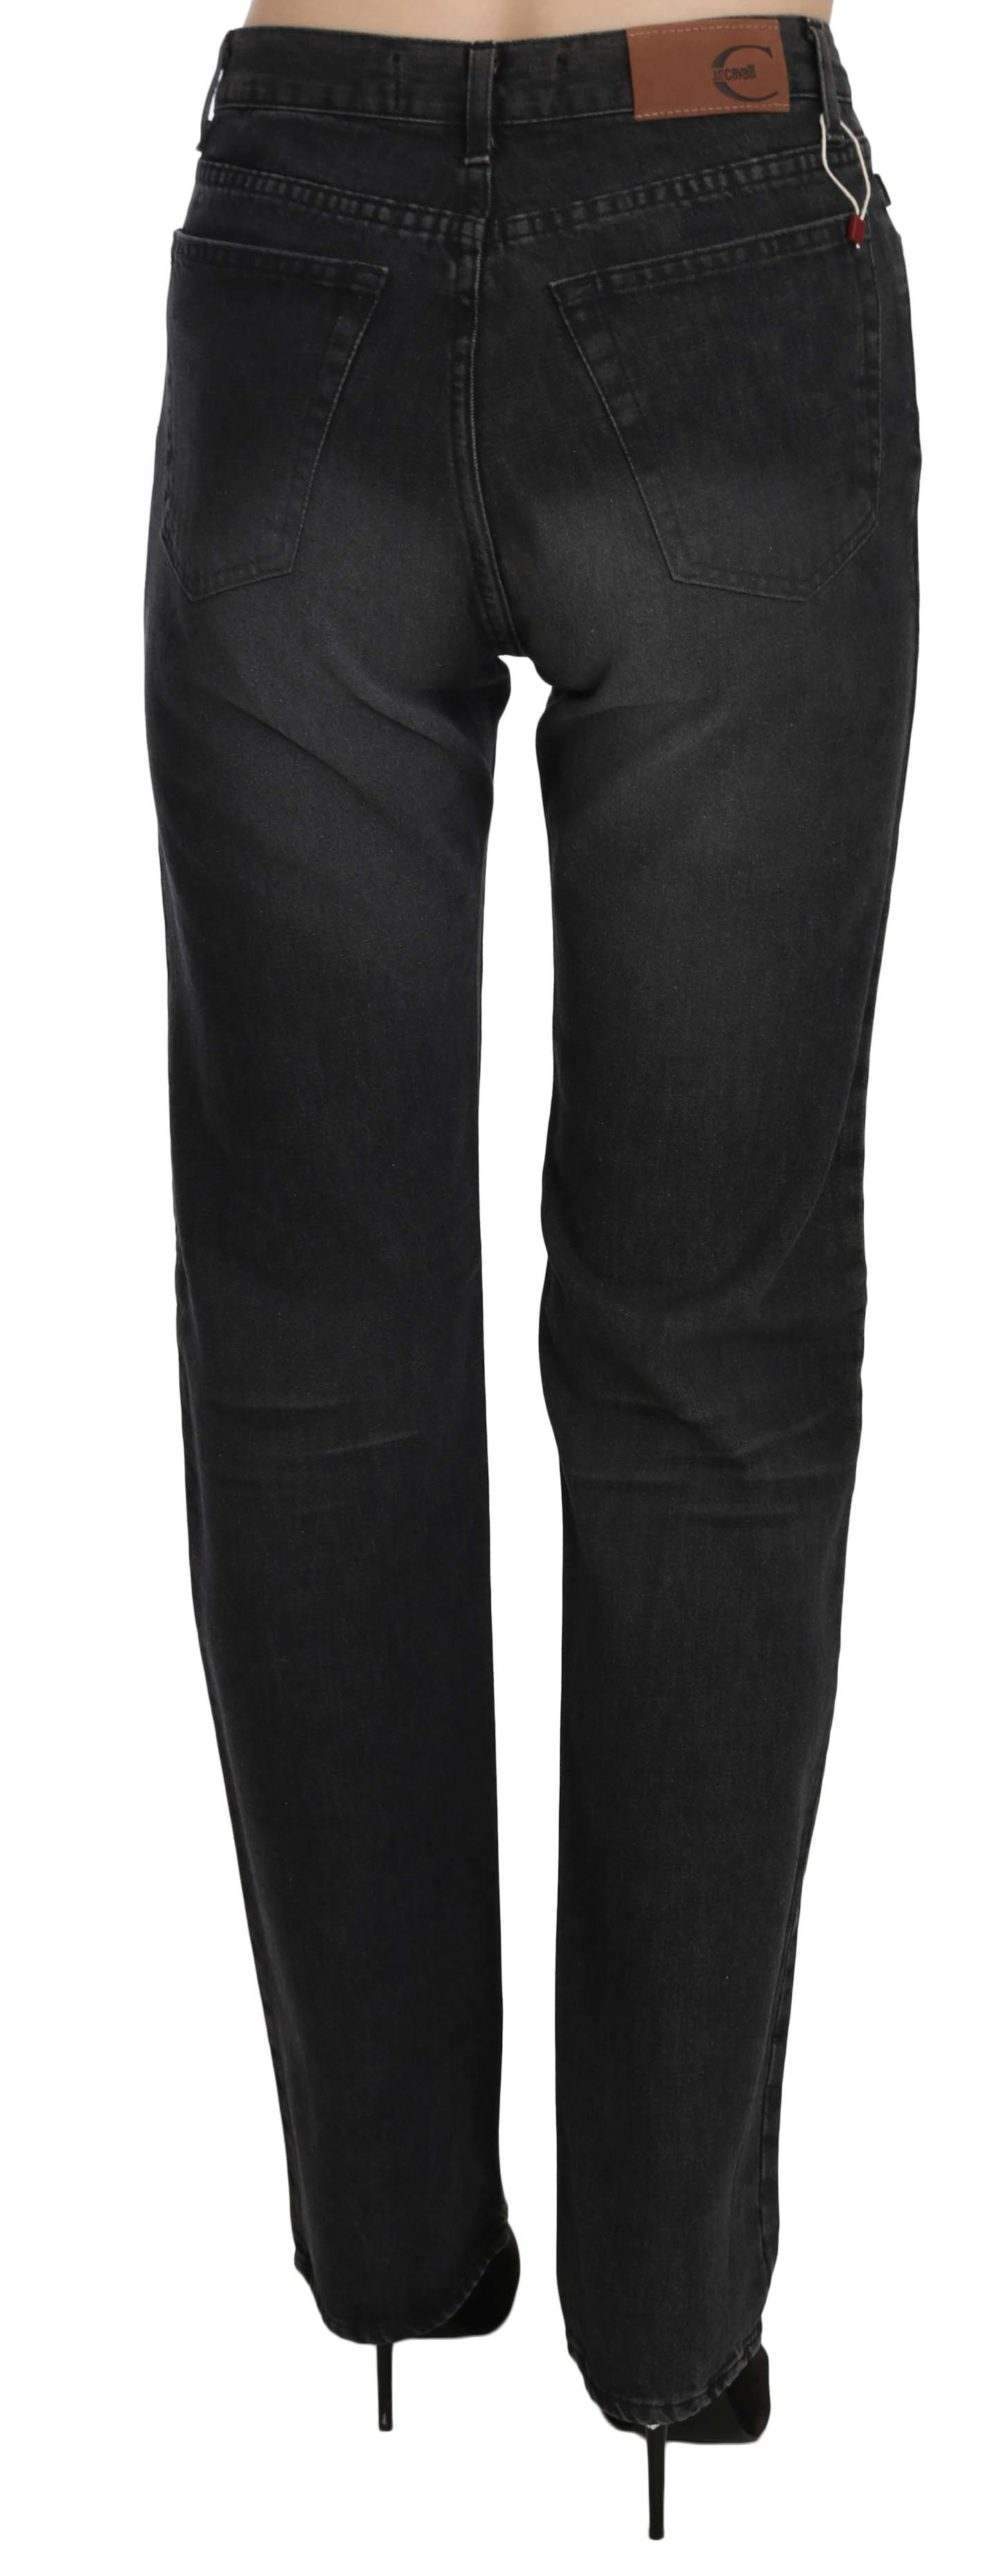 Just Cavalli Washed High Waist Straight Denim Pants Jeans #women, Black, Catch, feed-agegroup-adult, feed-color-black, feed-gender-female, feed-size-W30, Gender_Women, Jeans & Pants - Women - Clothing, Just Cavalli, Kogan, W30, Women - New Arrivals at SEYMAYKA